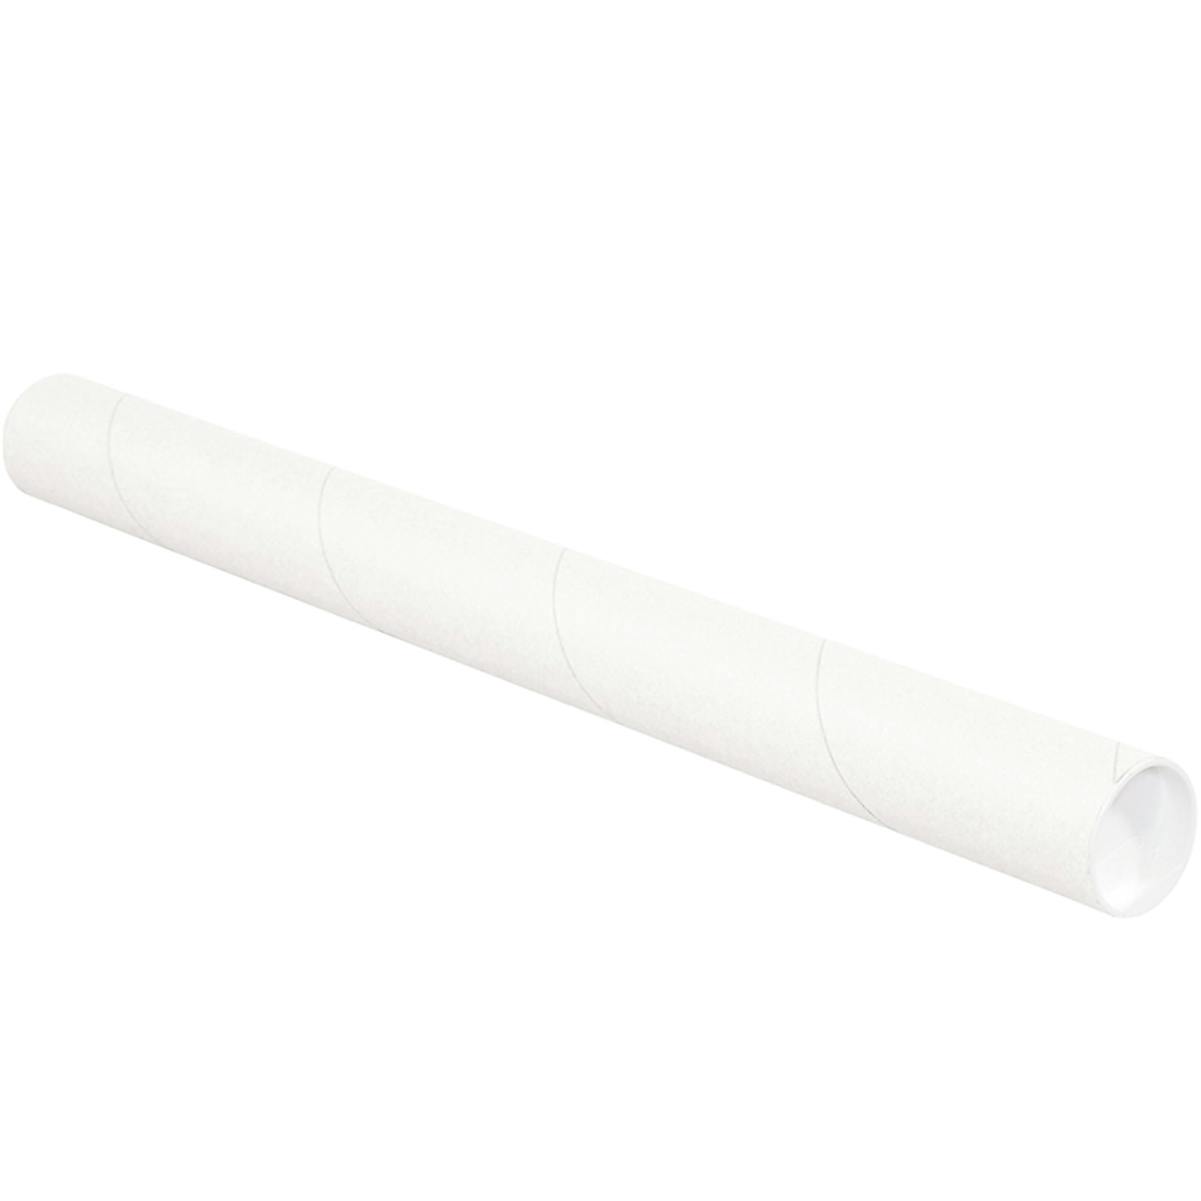 2 1/2 x 30 White Mailing Tubes with Caps Case/34